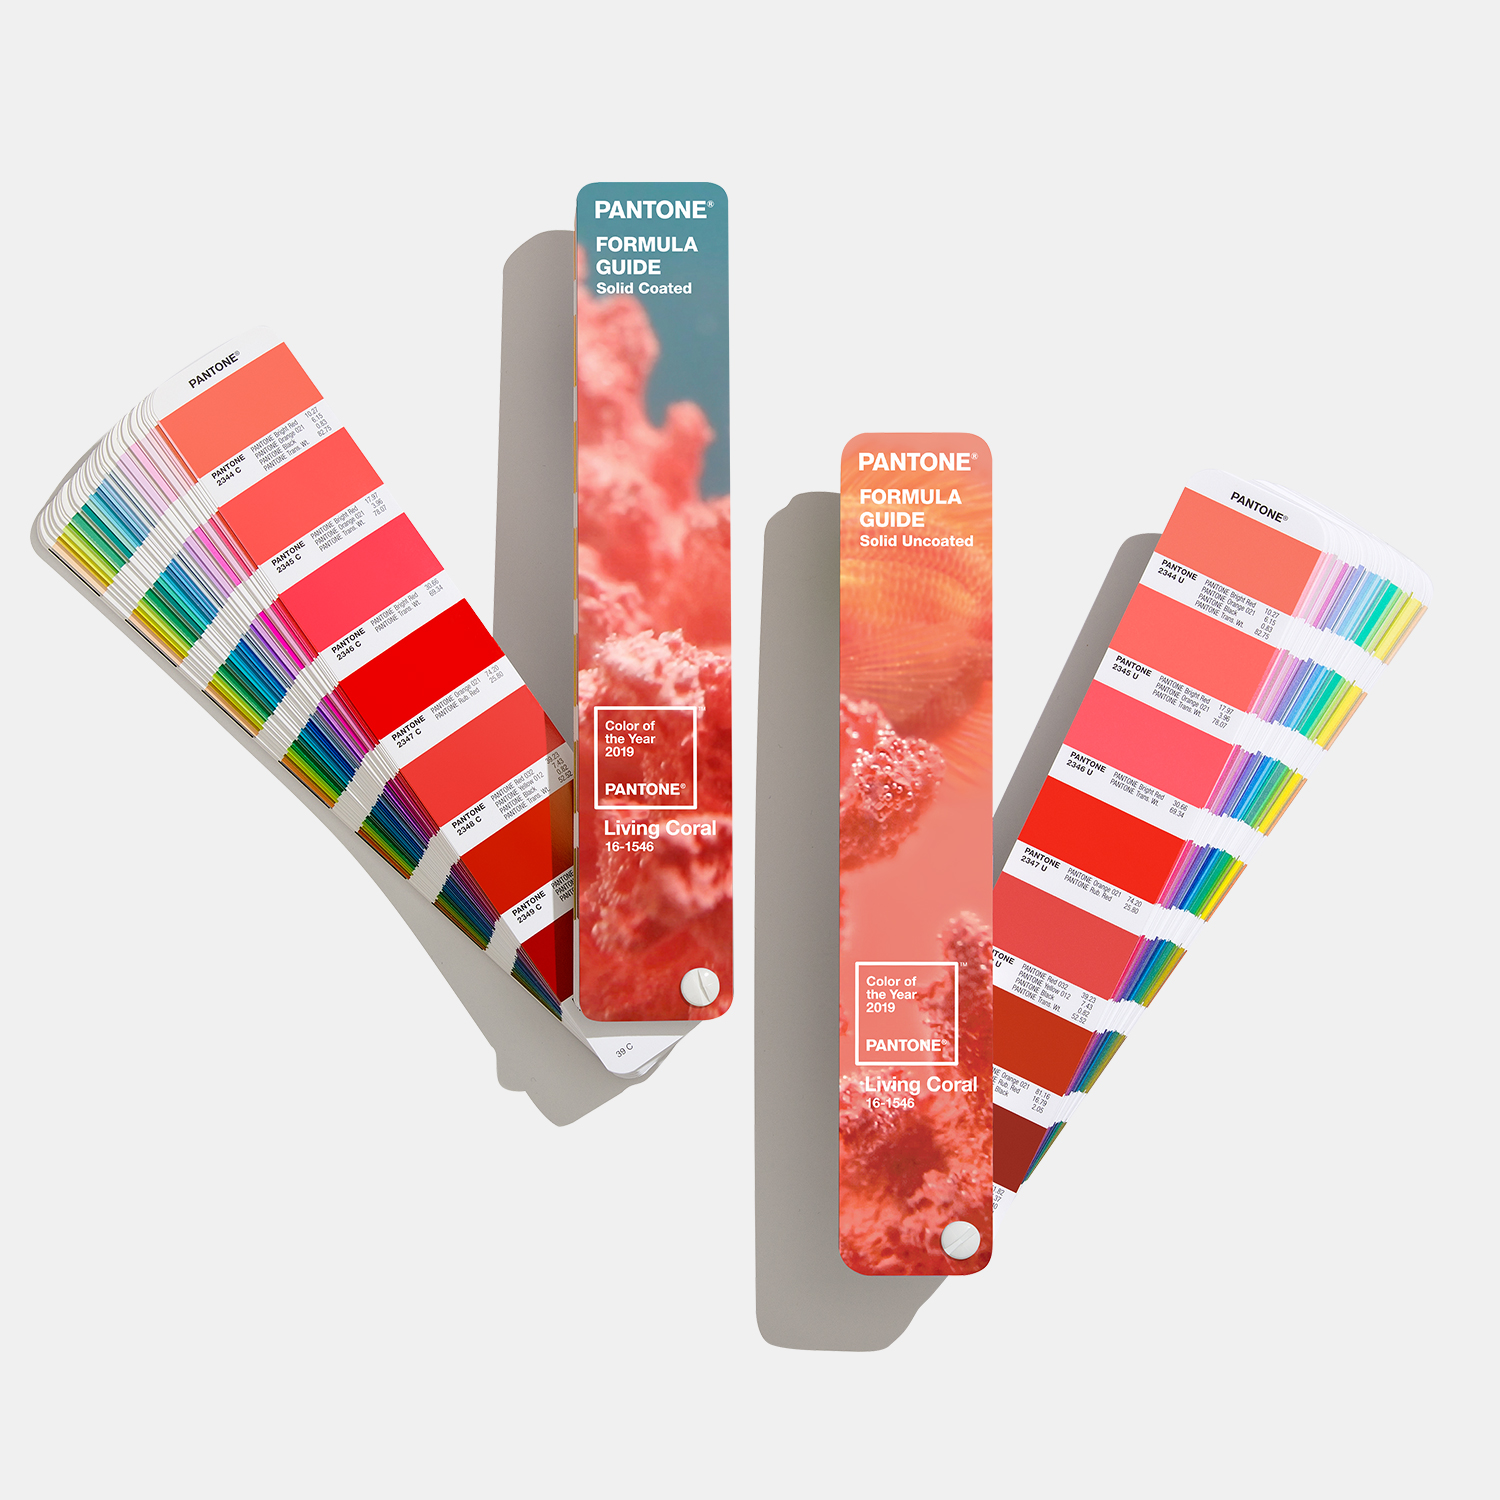 COY-pantone-pms-limited-edition-color-of-the-year-2019-formula-guide-coated-uncoated-1